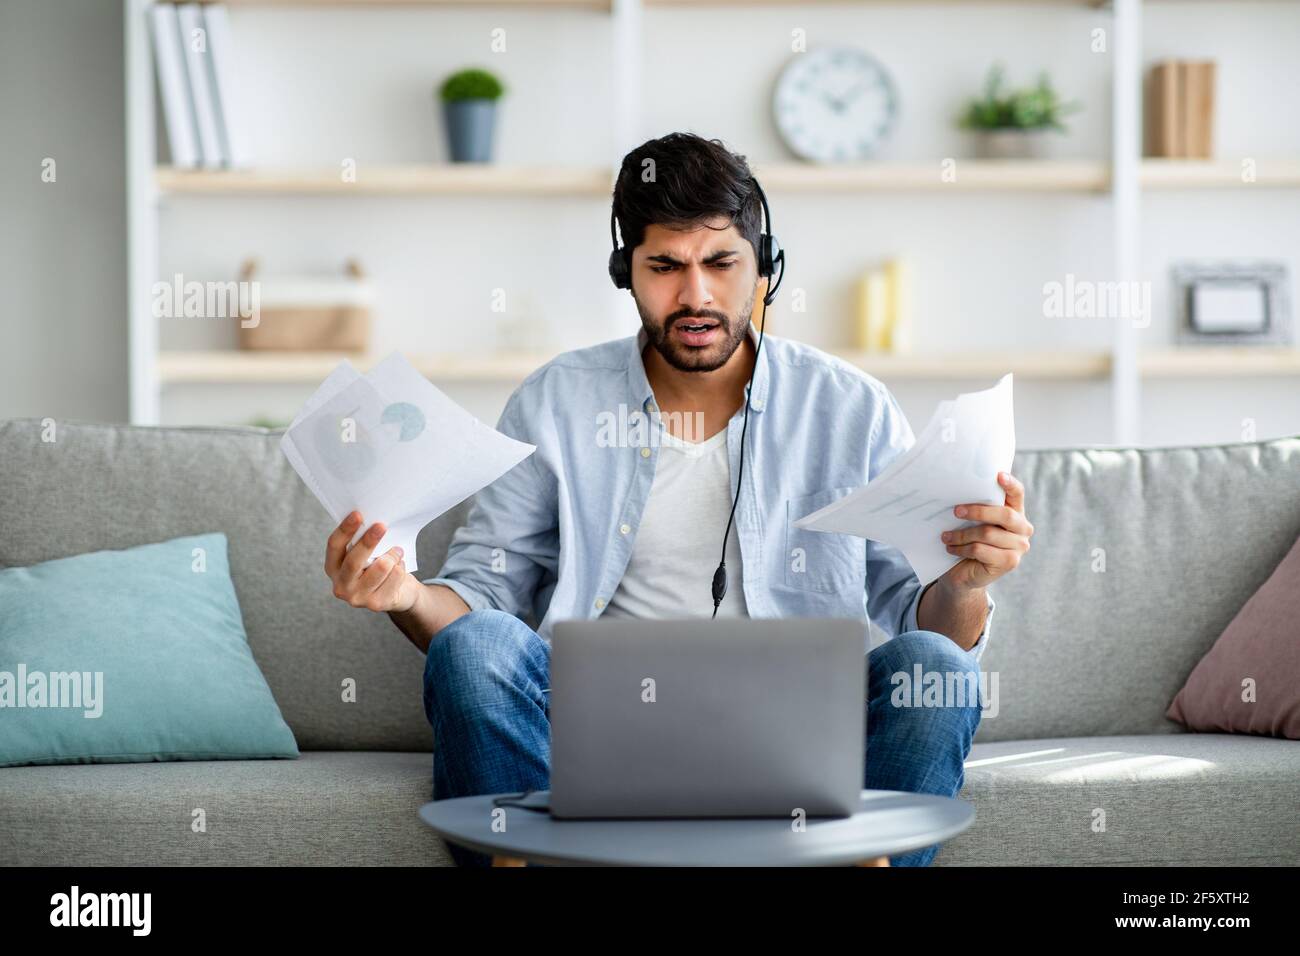 Remote business. Concerned arab man having video conference, discussing annual reports online distantly Stock Photo